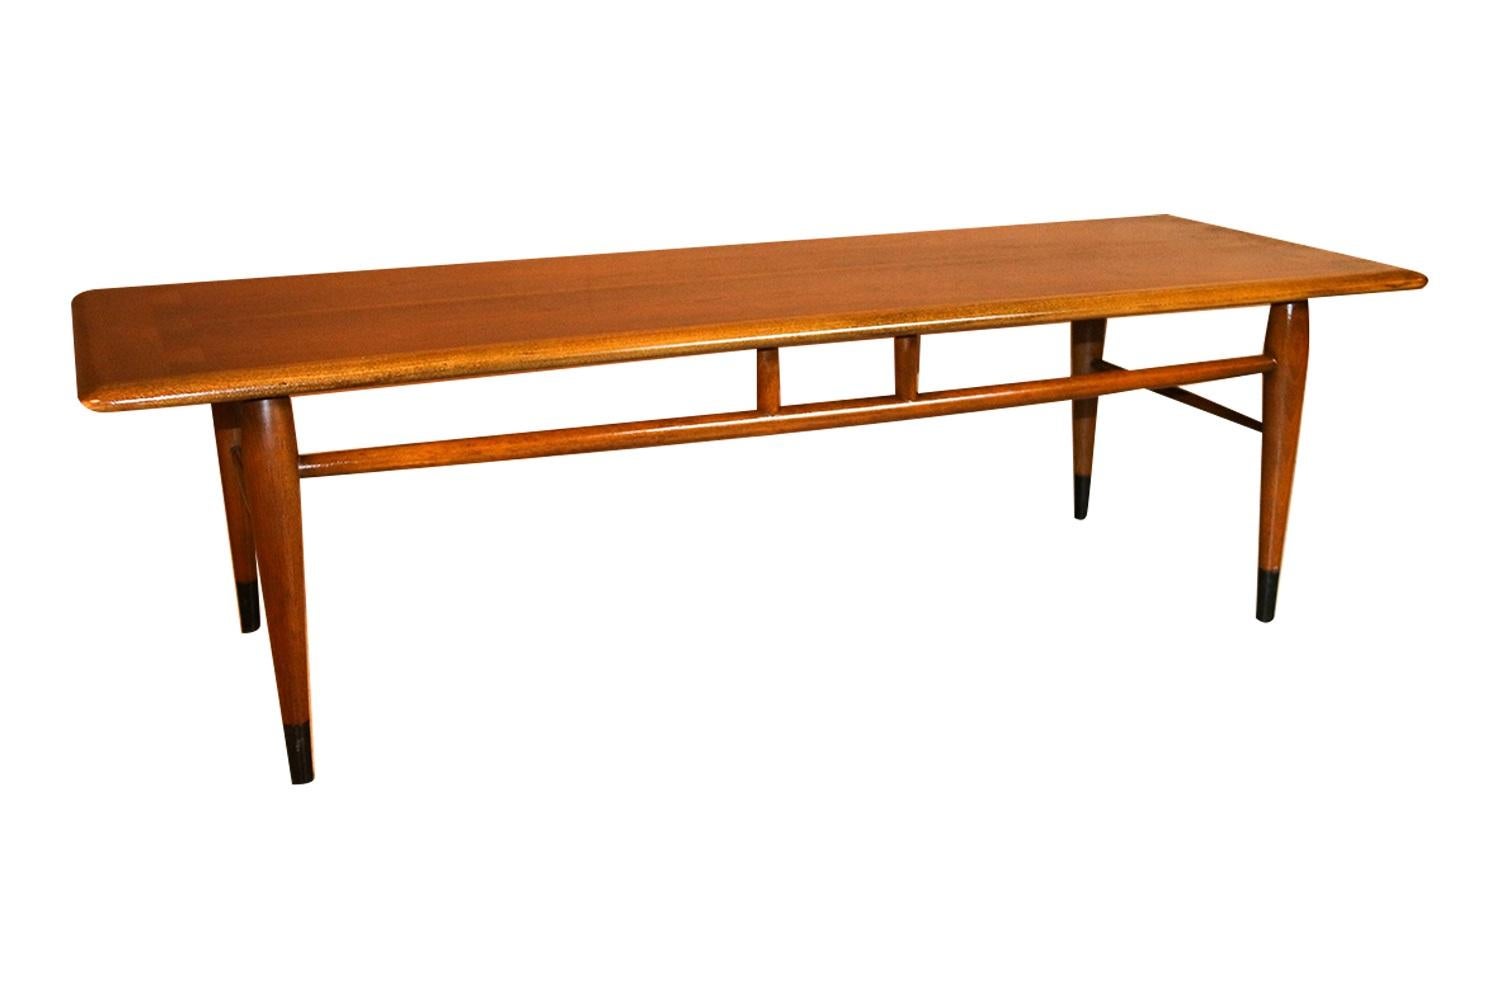 An American walnut and oak coffee table. This Mid-Century Modern coffee table in walnut veneered and solid oak was made in Altavista, VA by Lane Furniture (manufacturer). It has the contrasting dovetail detail on the top that identifies it as part